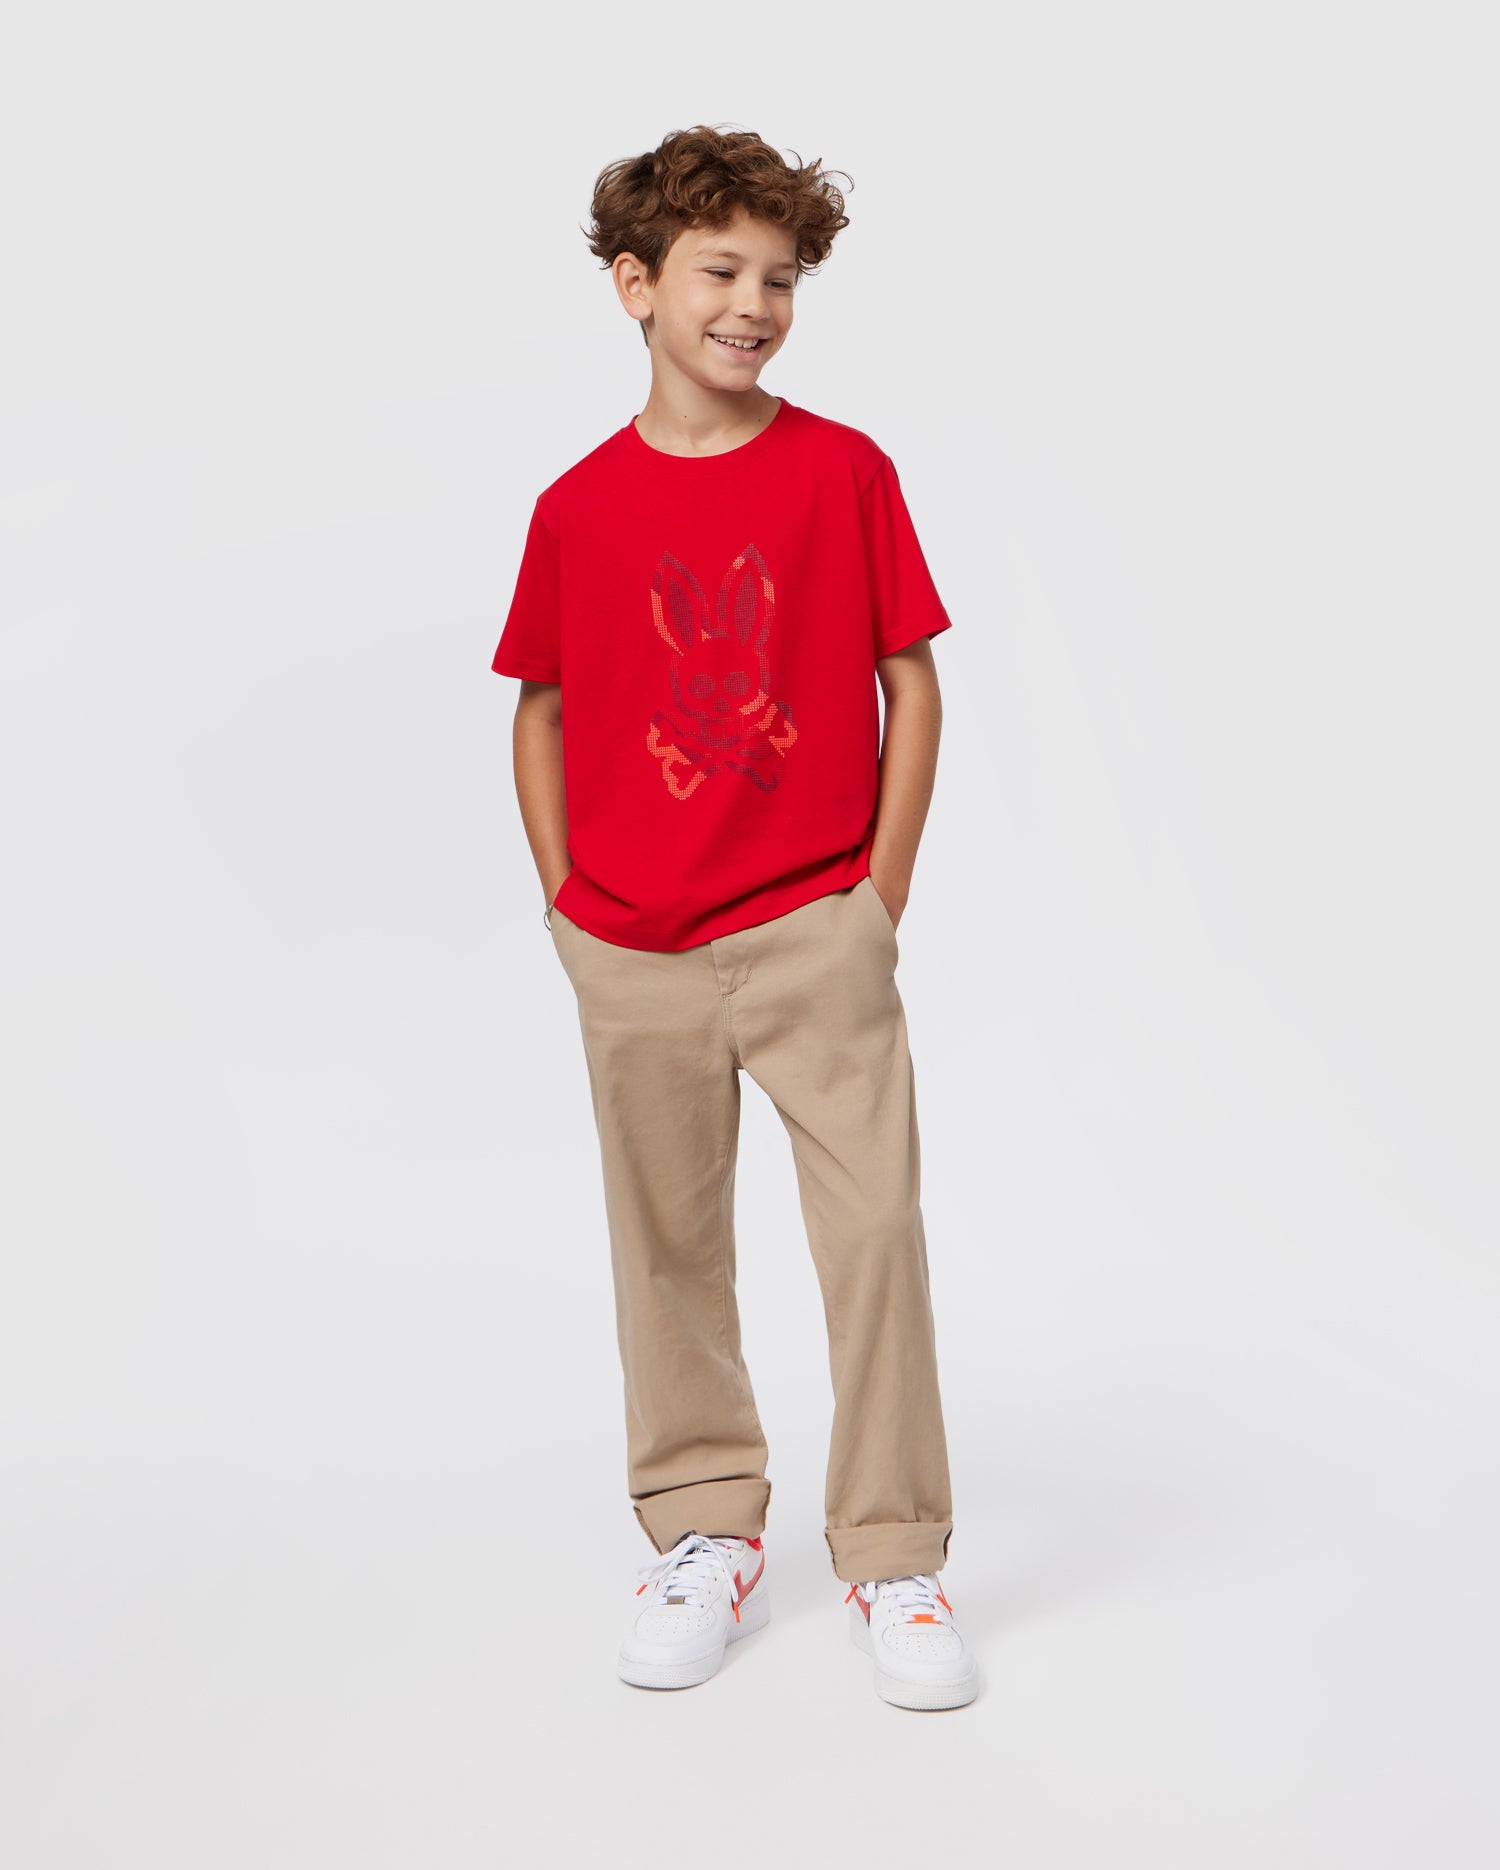 RUBBER BUNNY SLEEVE KIDS TEE | RED EMBOSSED PSYCHO SACRAMENTO LONG